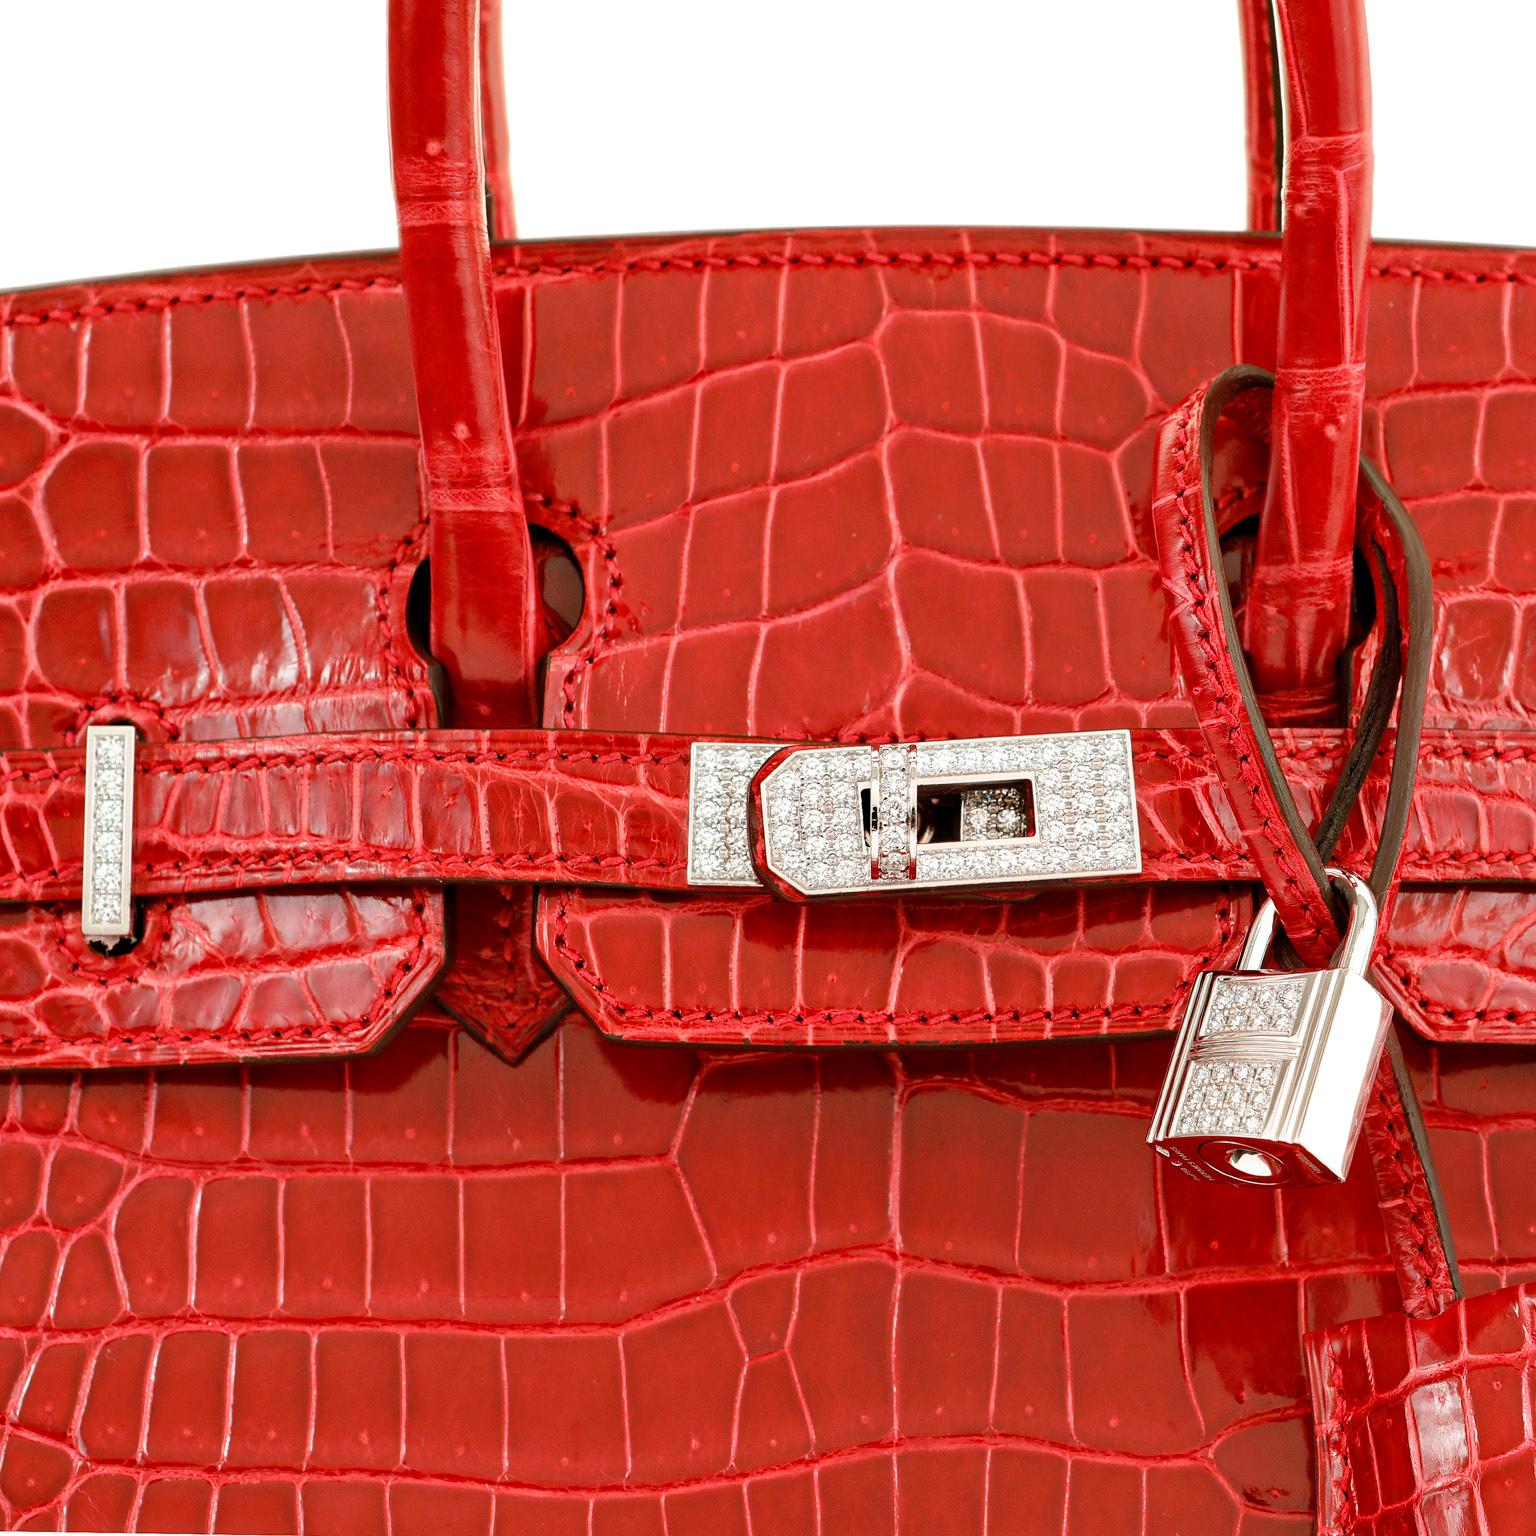 This authentic Hermès 25 cm Lipstick Red Porosus Crocodile Diamond Encrusted Birkin is in pristine unworn condition, never before carried.  Incredibly rare and specially ordered, this exotic Birkin is perhaps the most collectible of all. 

Porosus